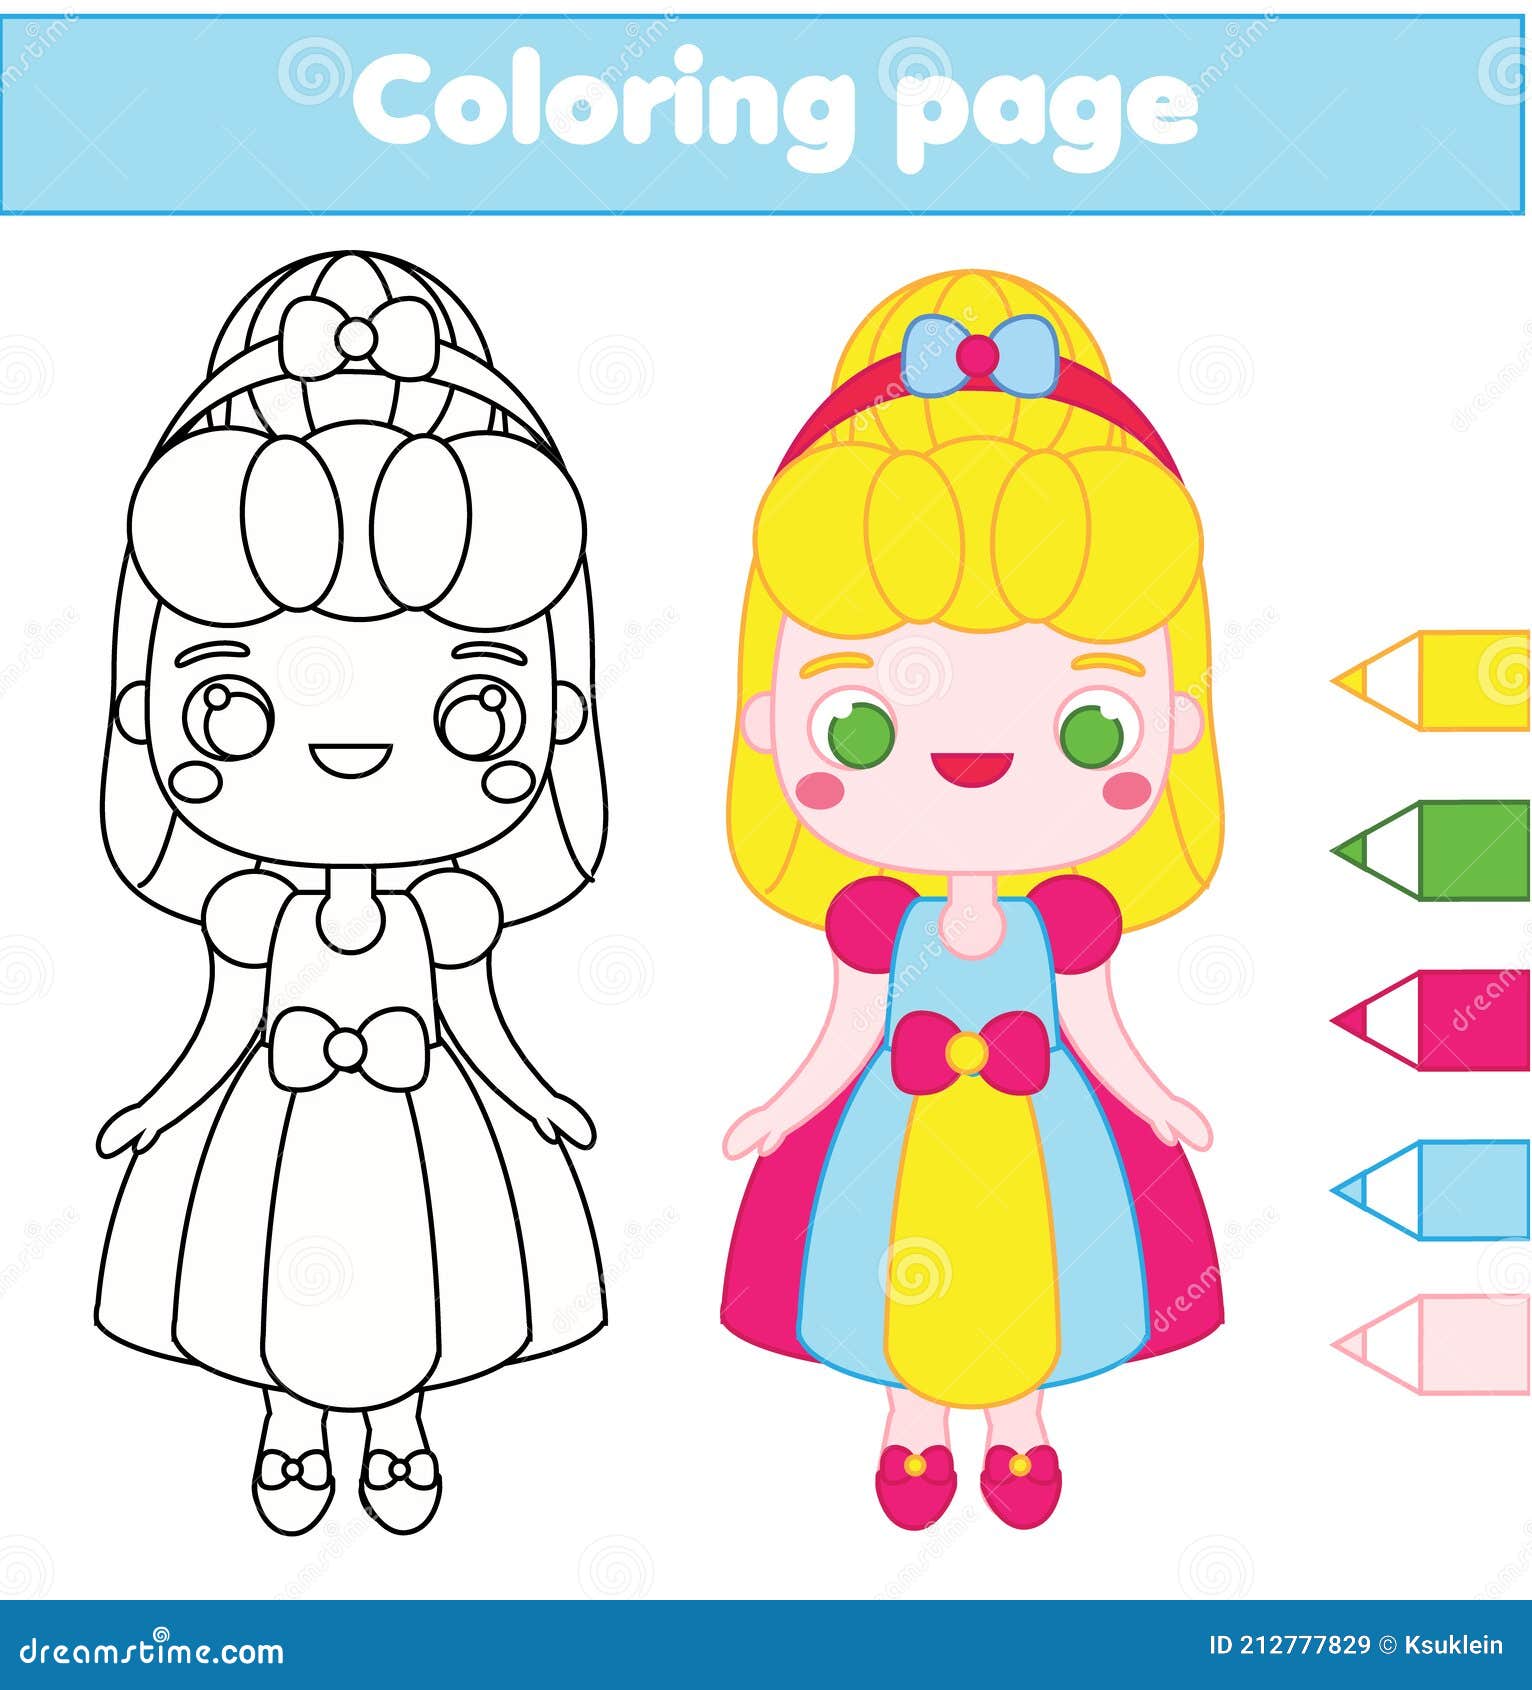 How to Draw a Cute Cup - Drawing and Coloring Page | Mimy.org